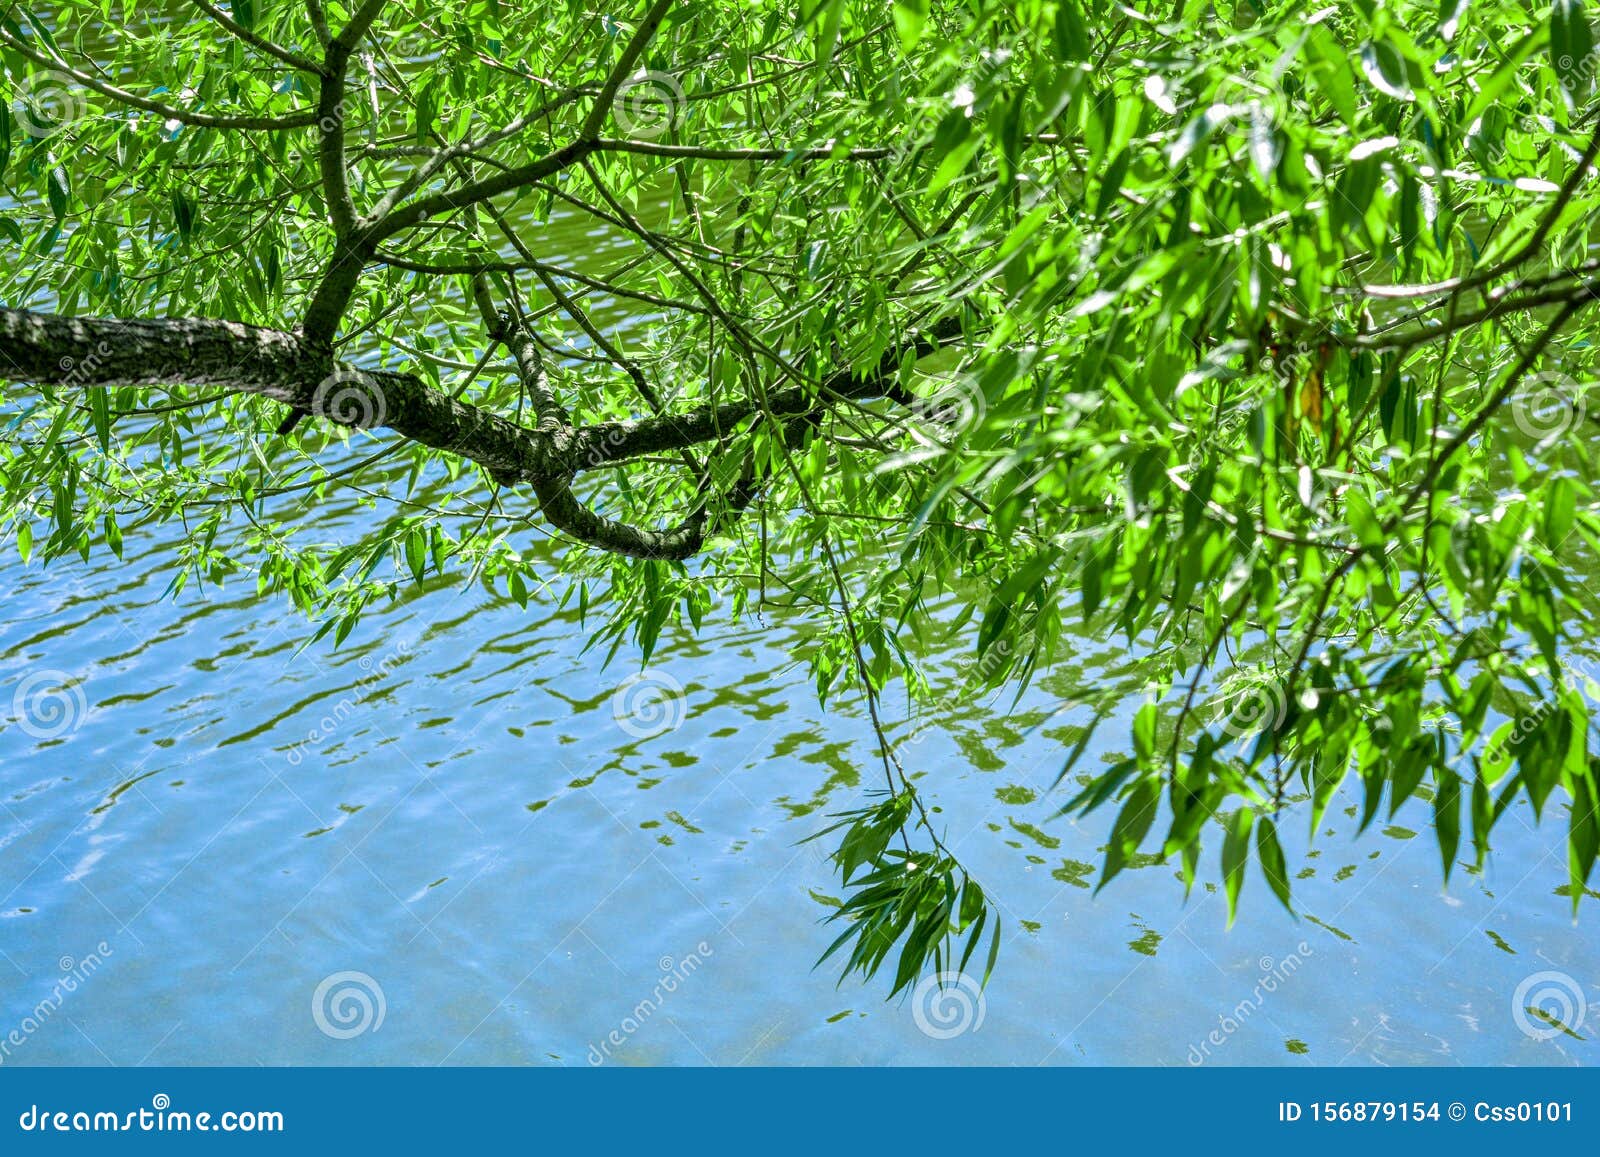 Willow Tree Branches are Reflected in Water of Pond or Lake with Small ...